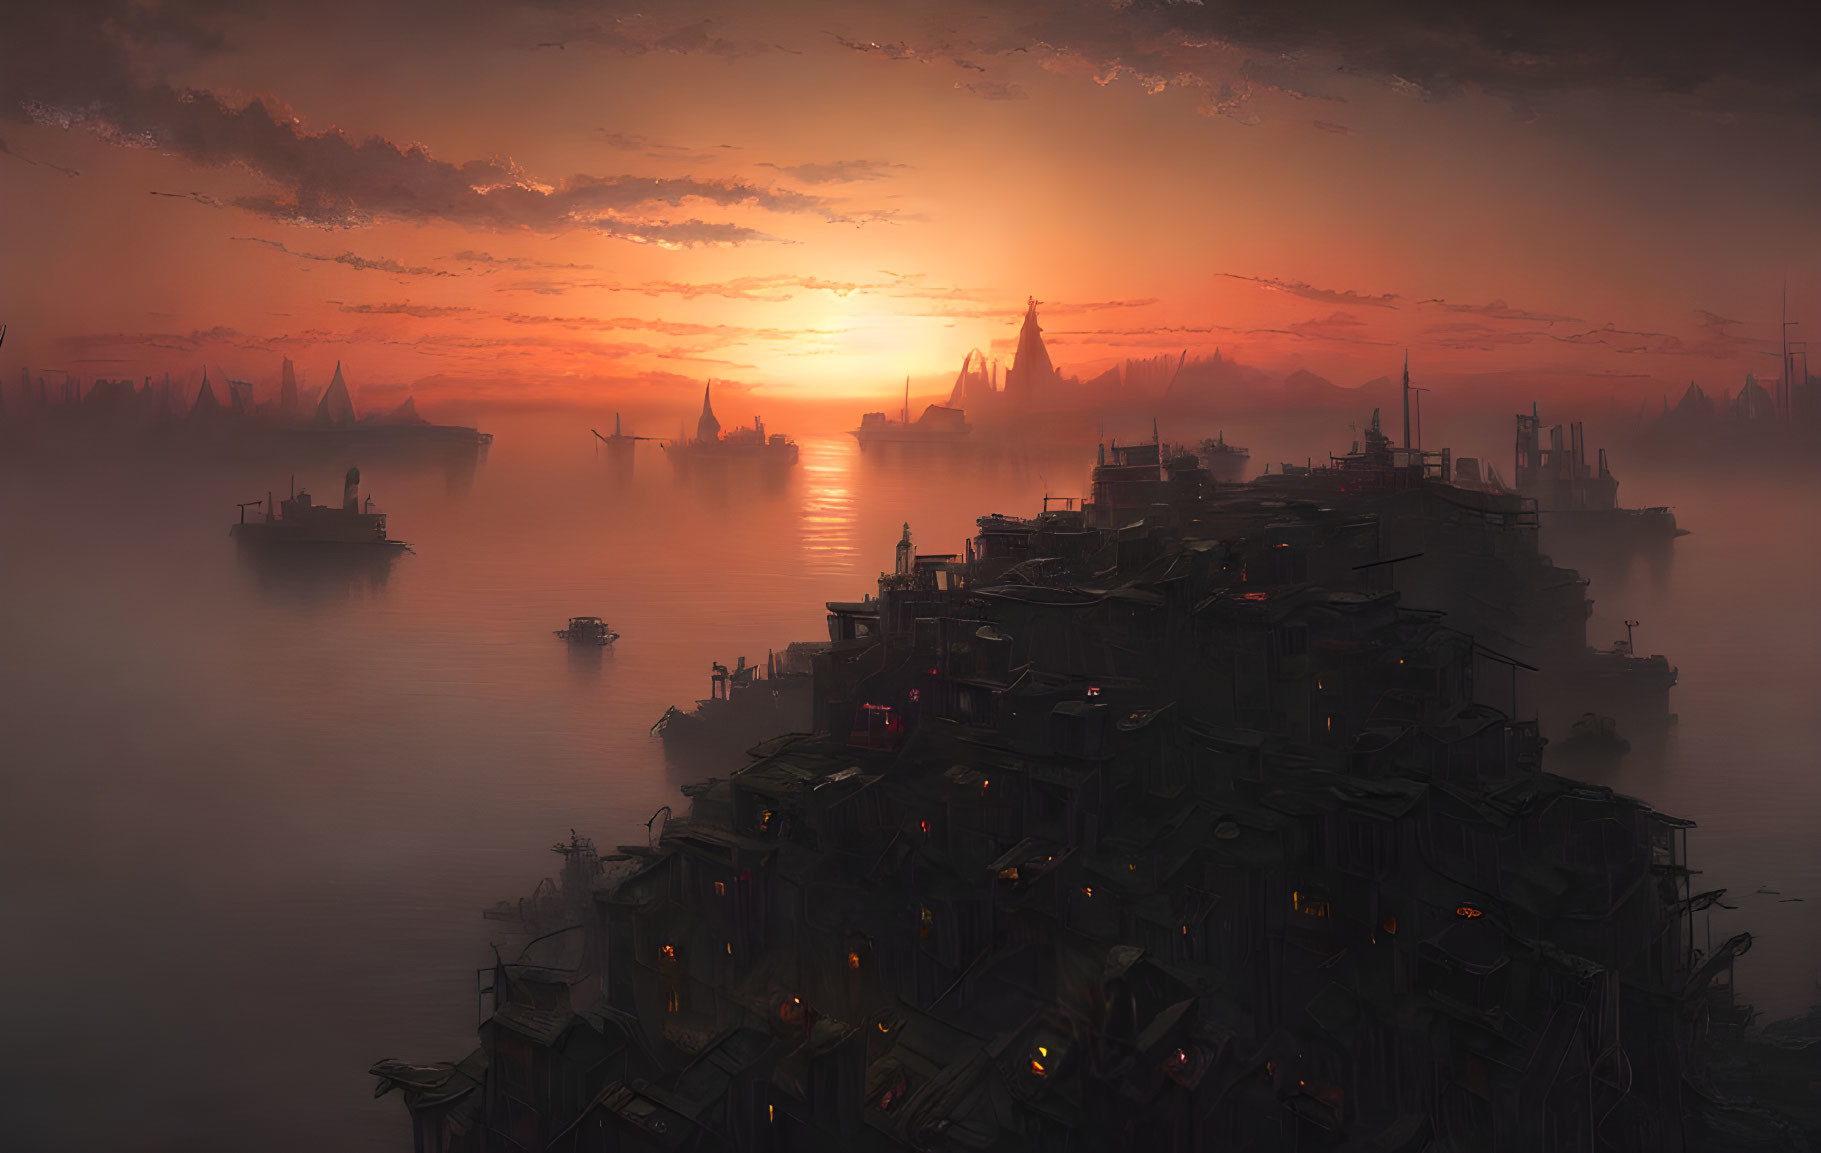 Dystopian sunset over crowded waterfront city with dense buildings and ships against orange sky